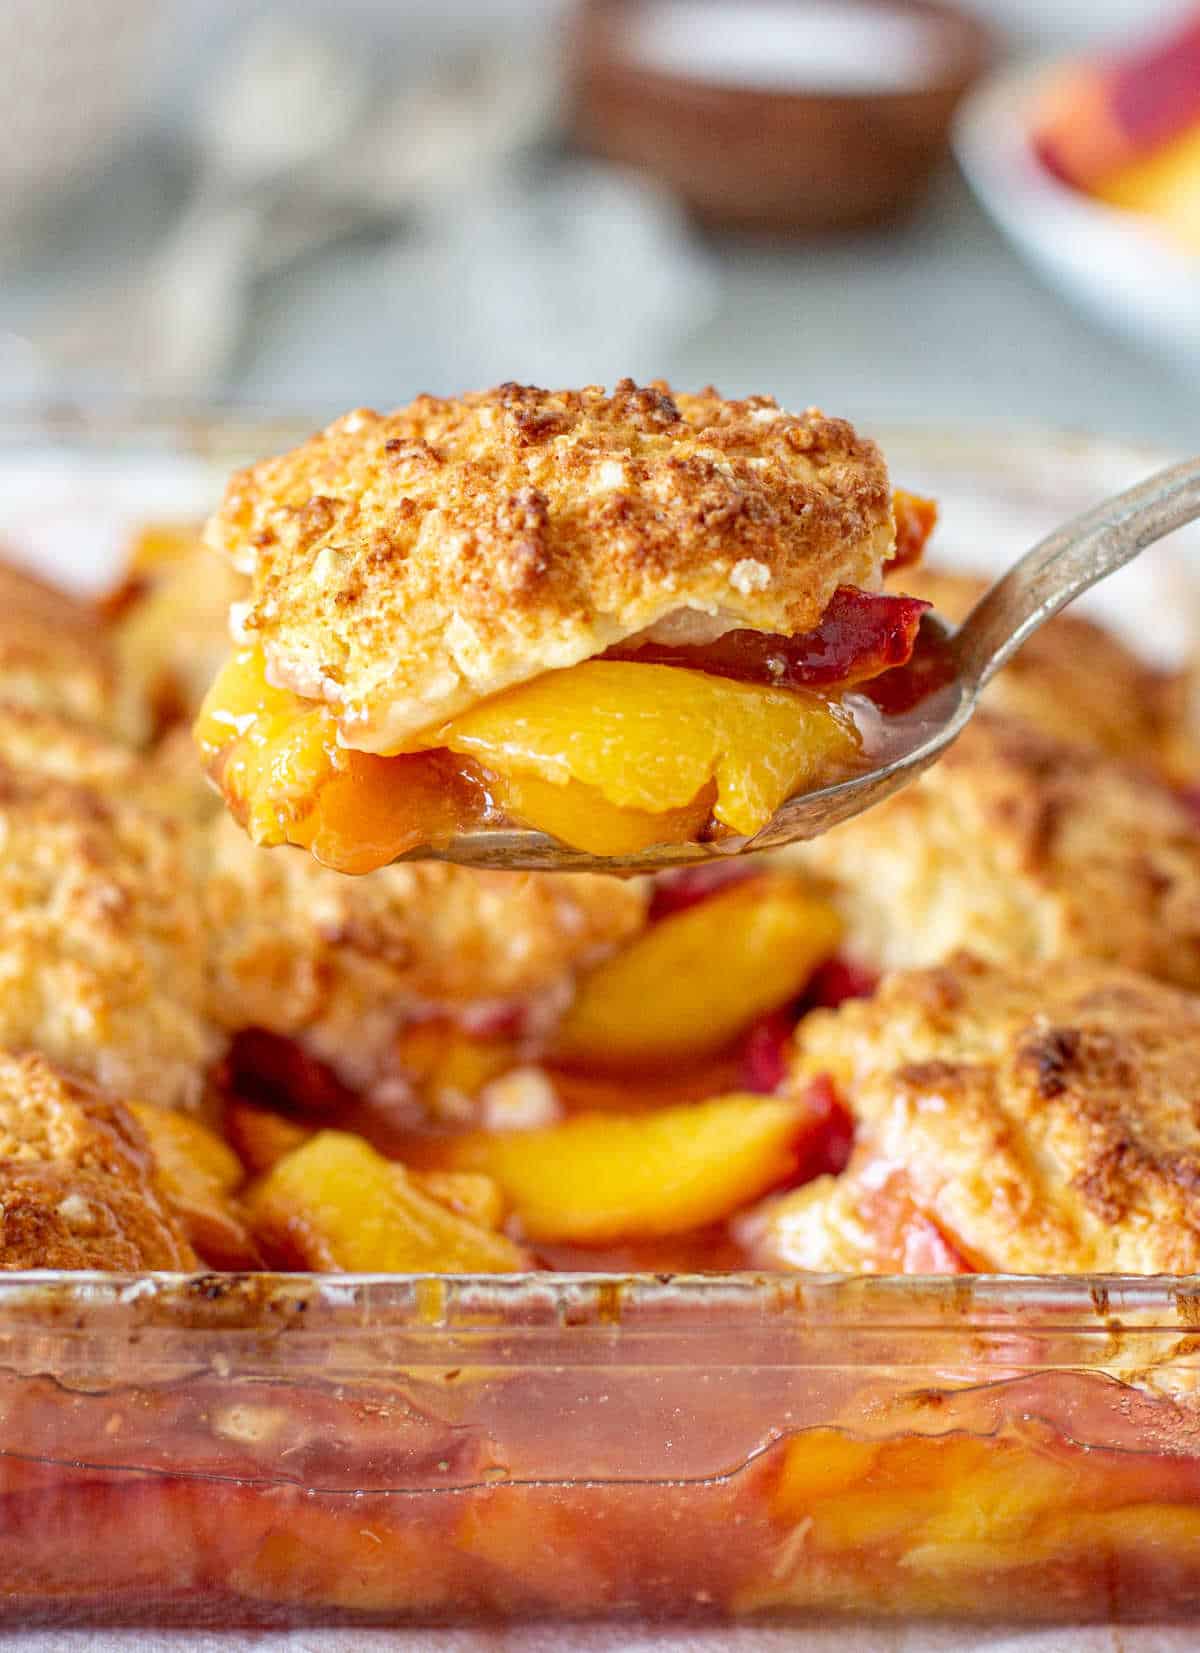 Lifting portion of peach cobbler from glass dish with silver spoon.